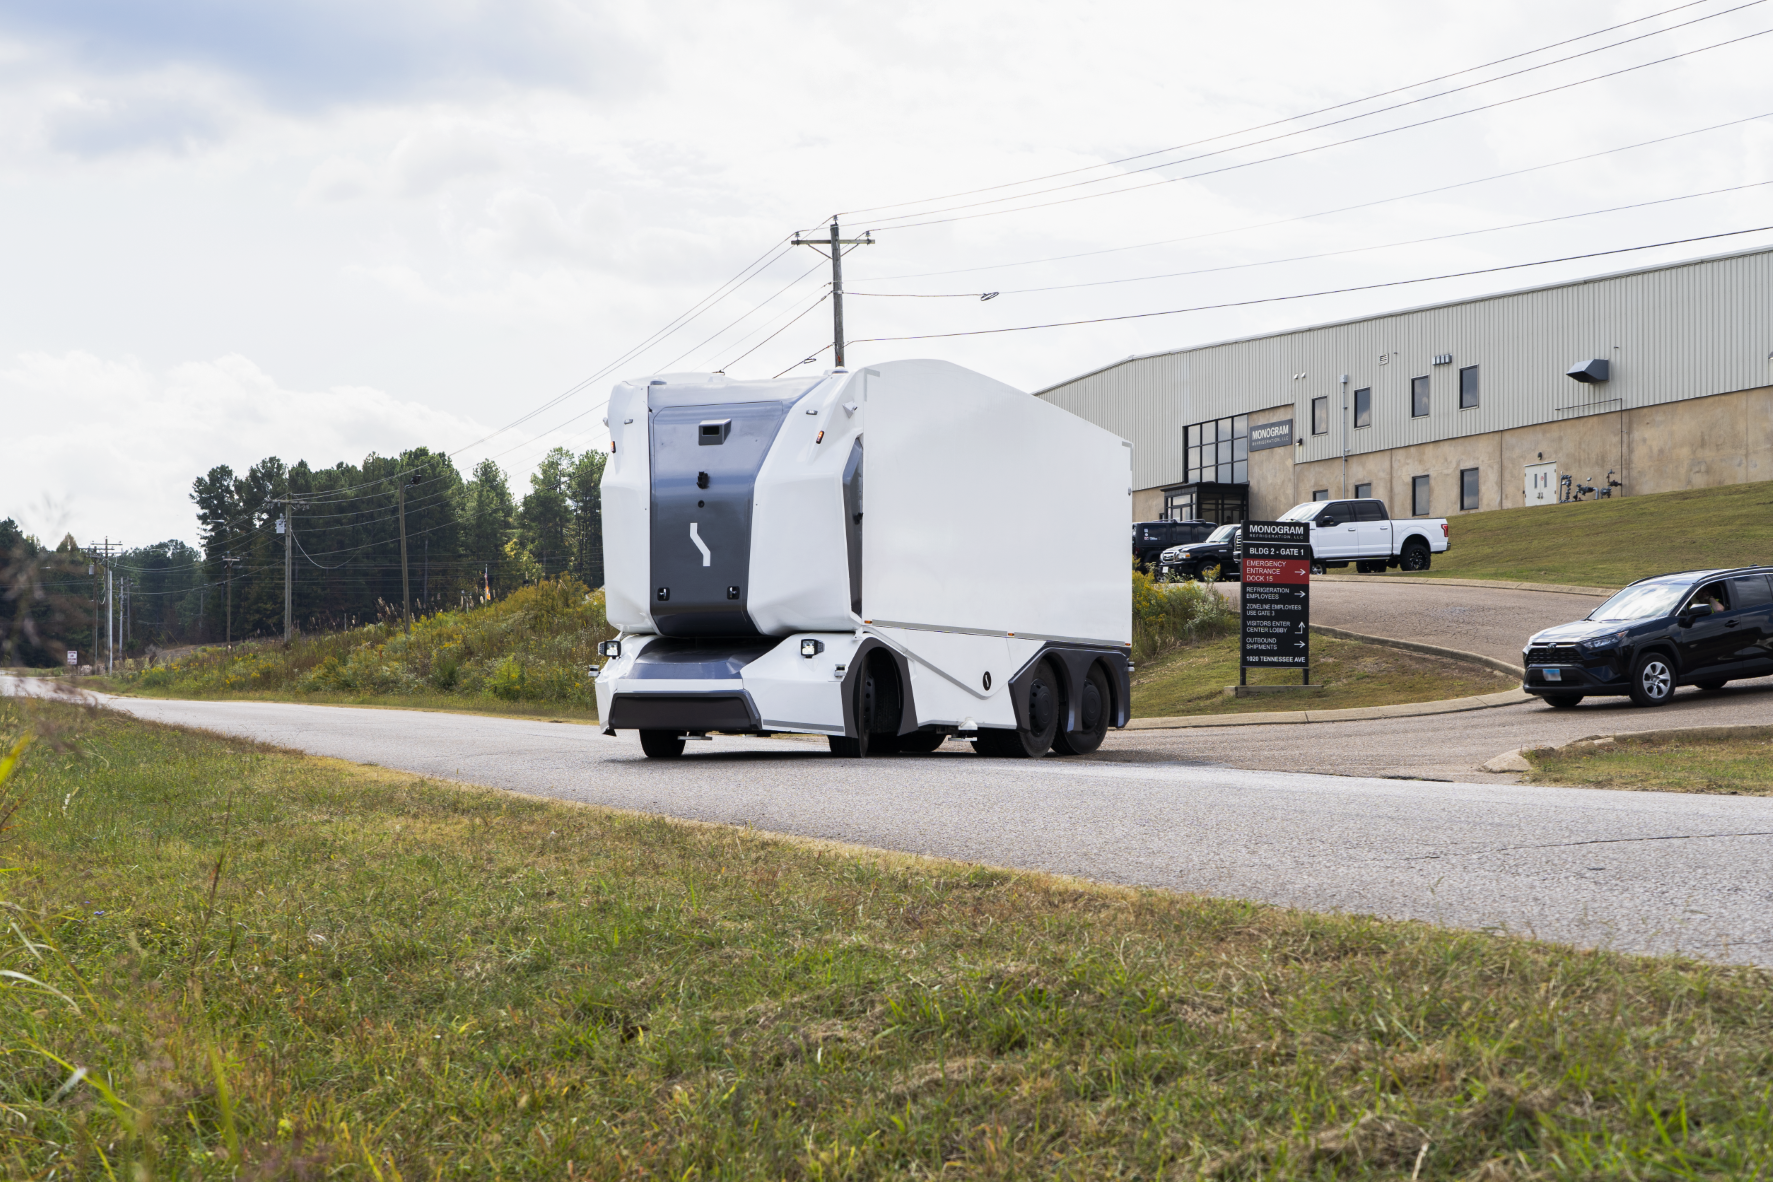 Freight mobility technology company Einride successfully completed a public road pilot of the Einride Pod, an autonomous, electric vehicle, in Selmer, Tennessee in partnership with GE Appliances. The pod transported finished products on the highway between GE Appliances’ Monogram Refrigeration LLC manufacturing plant and warehouse.  